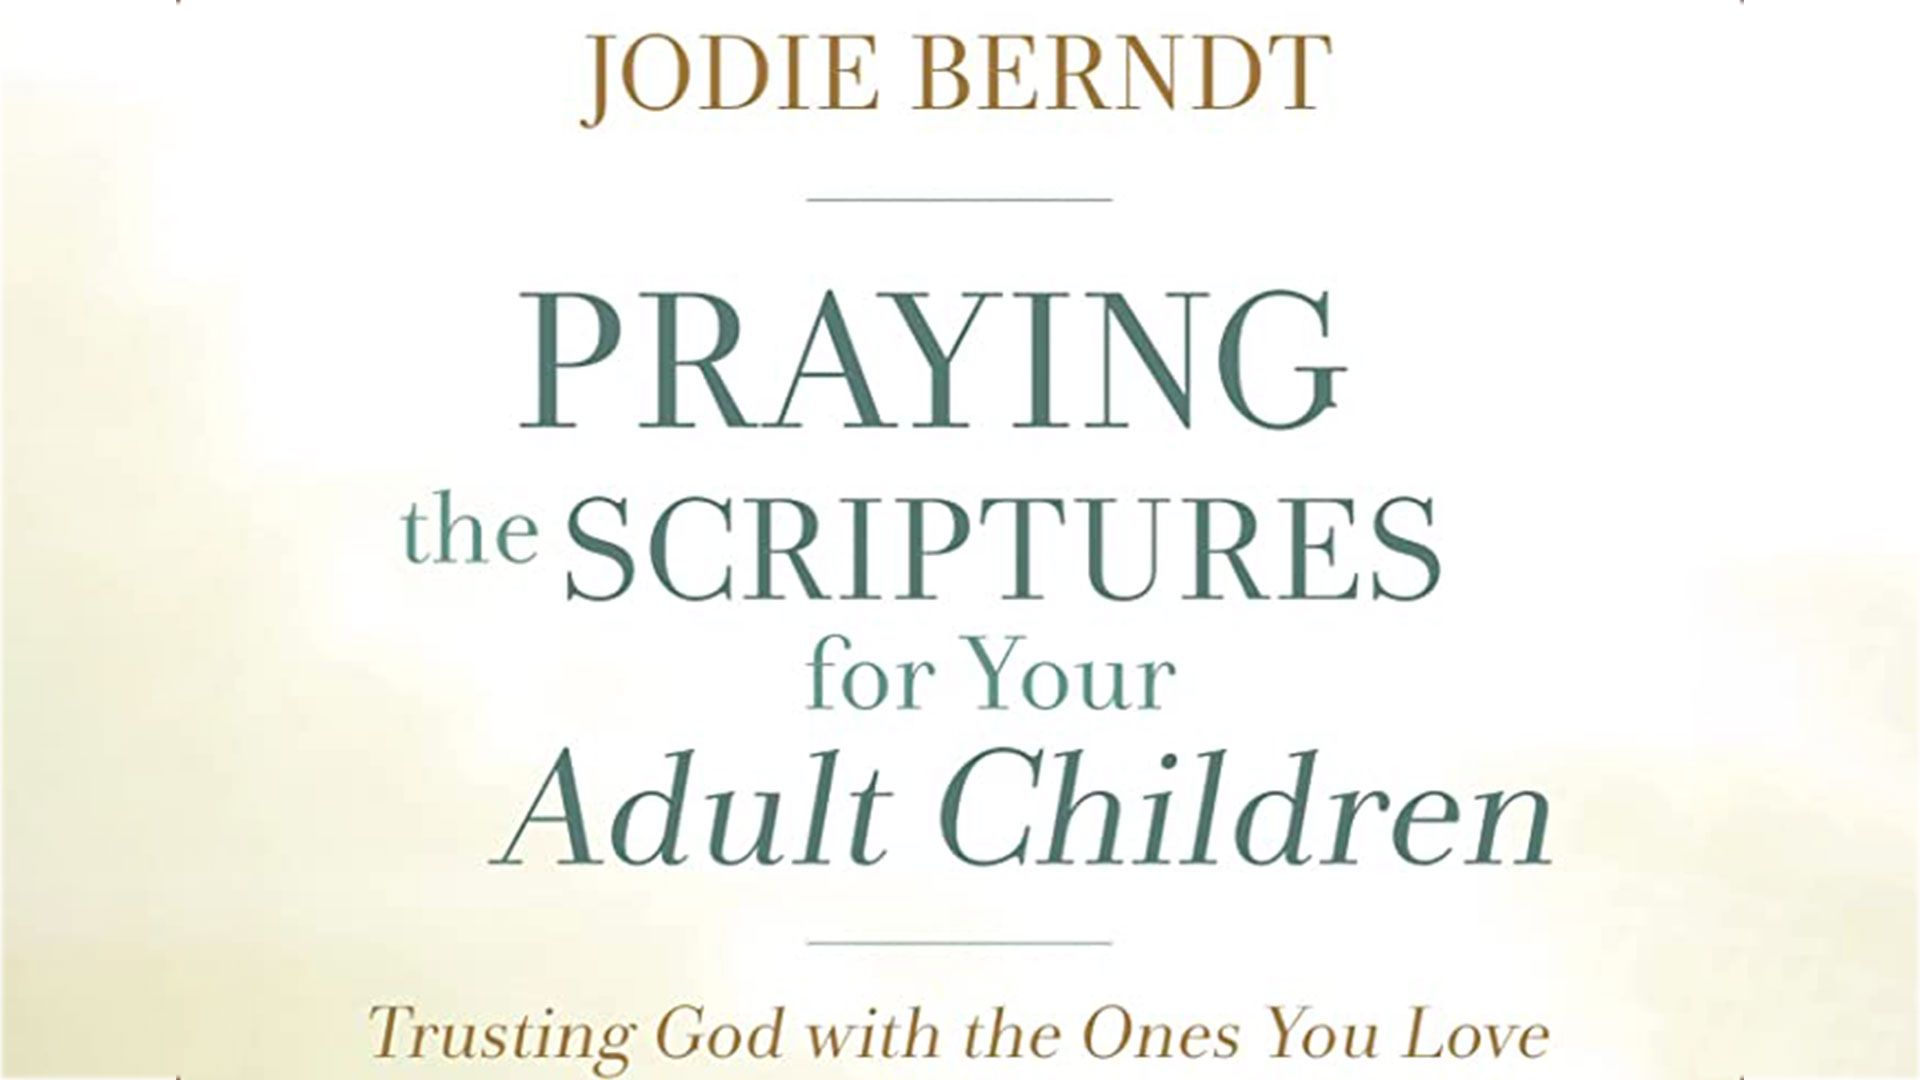 Desert Springs Church Women's Ministry Summer Study - Praying the Scriptures for Your Adult Children by Jodie Berndt